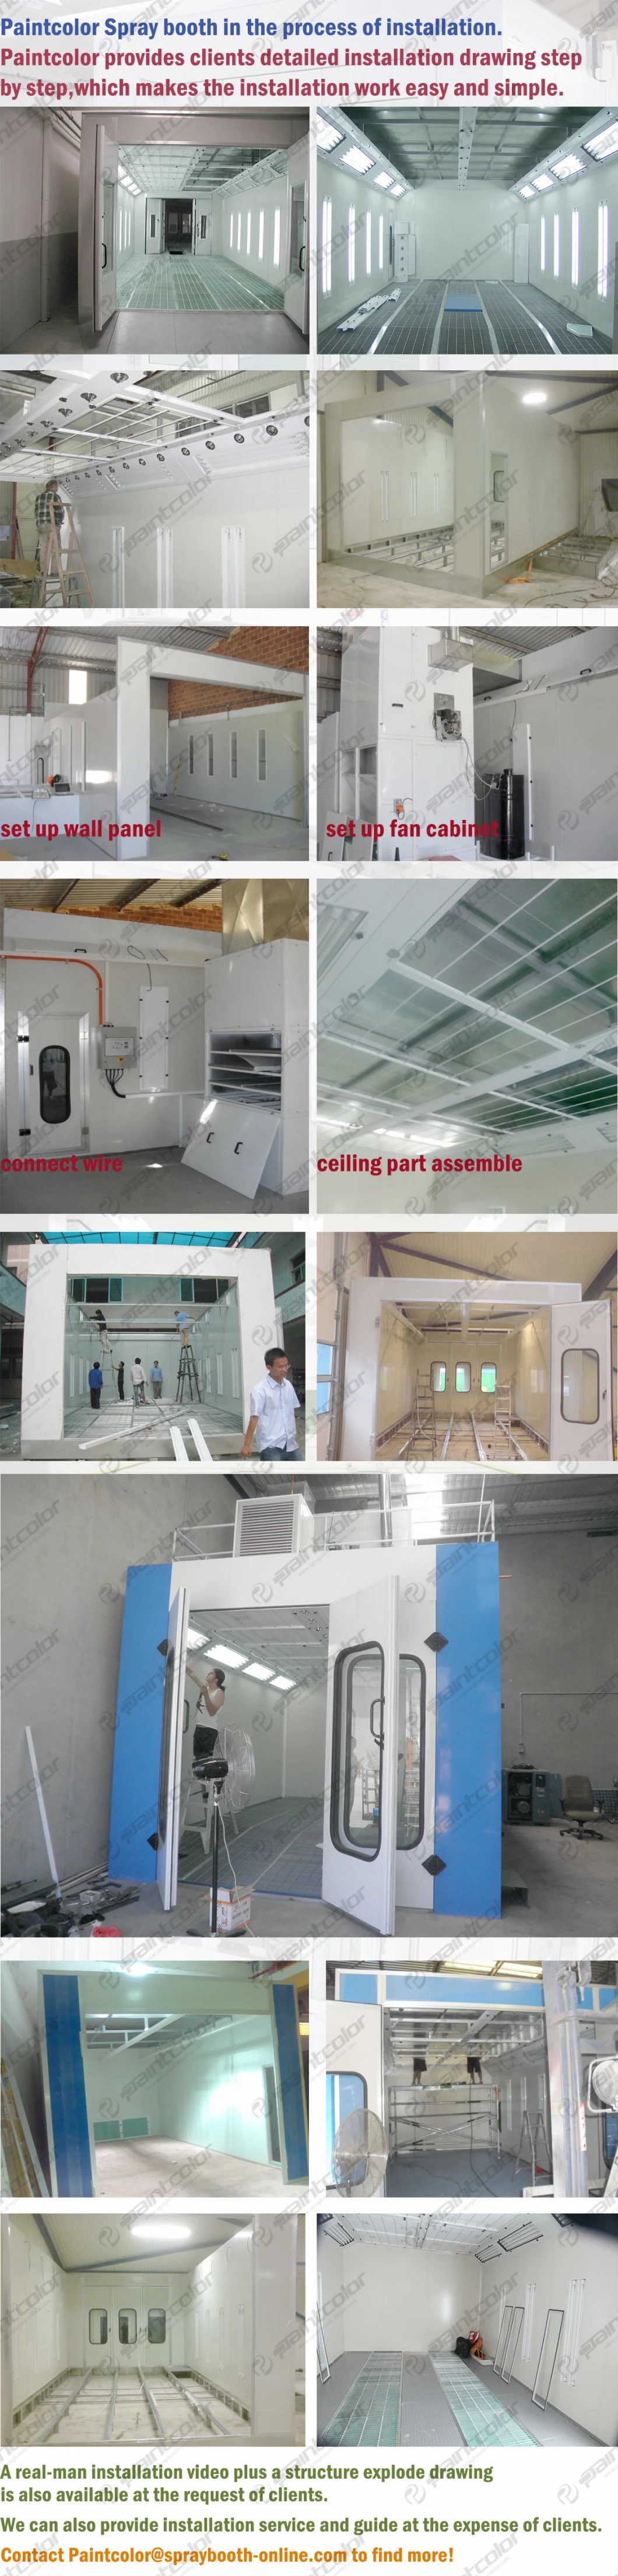 High Quality Downdraft Car Body Spray Painting Booth/Auto Spray Paint Booth